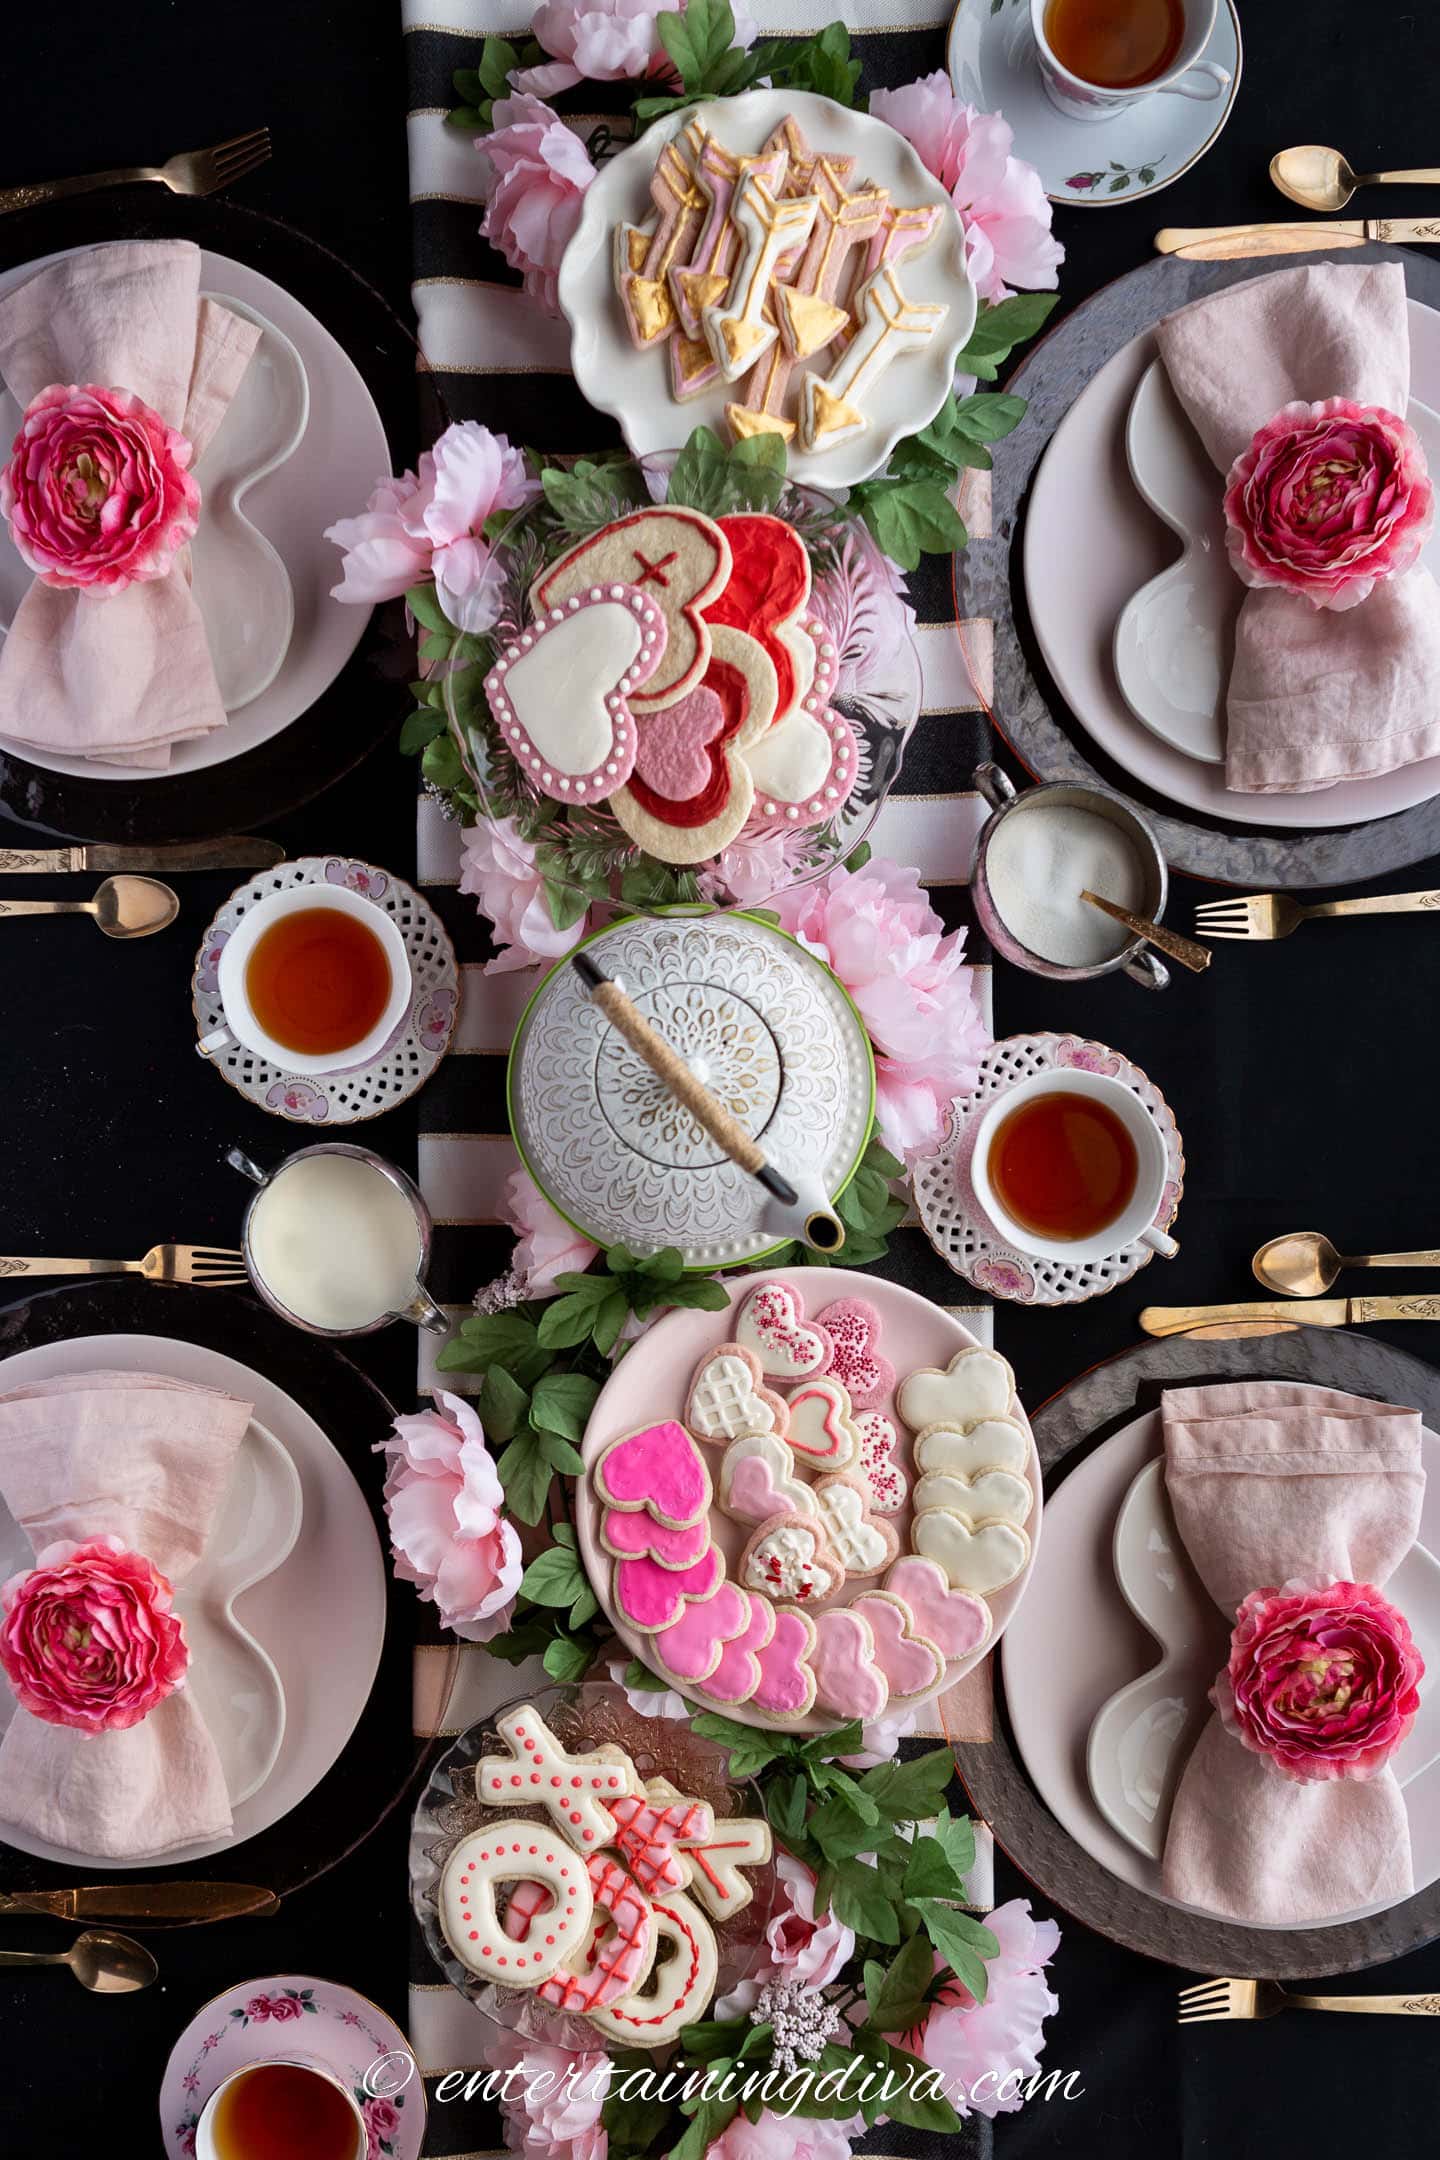 Valentine Day tea party centerpiece made with faux flowers, heart and arrow sugar cookies on cake stands and a tea pot on a cake stand